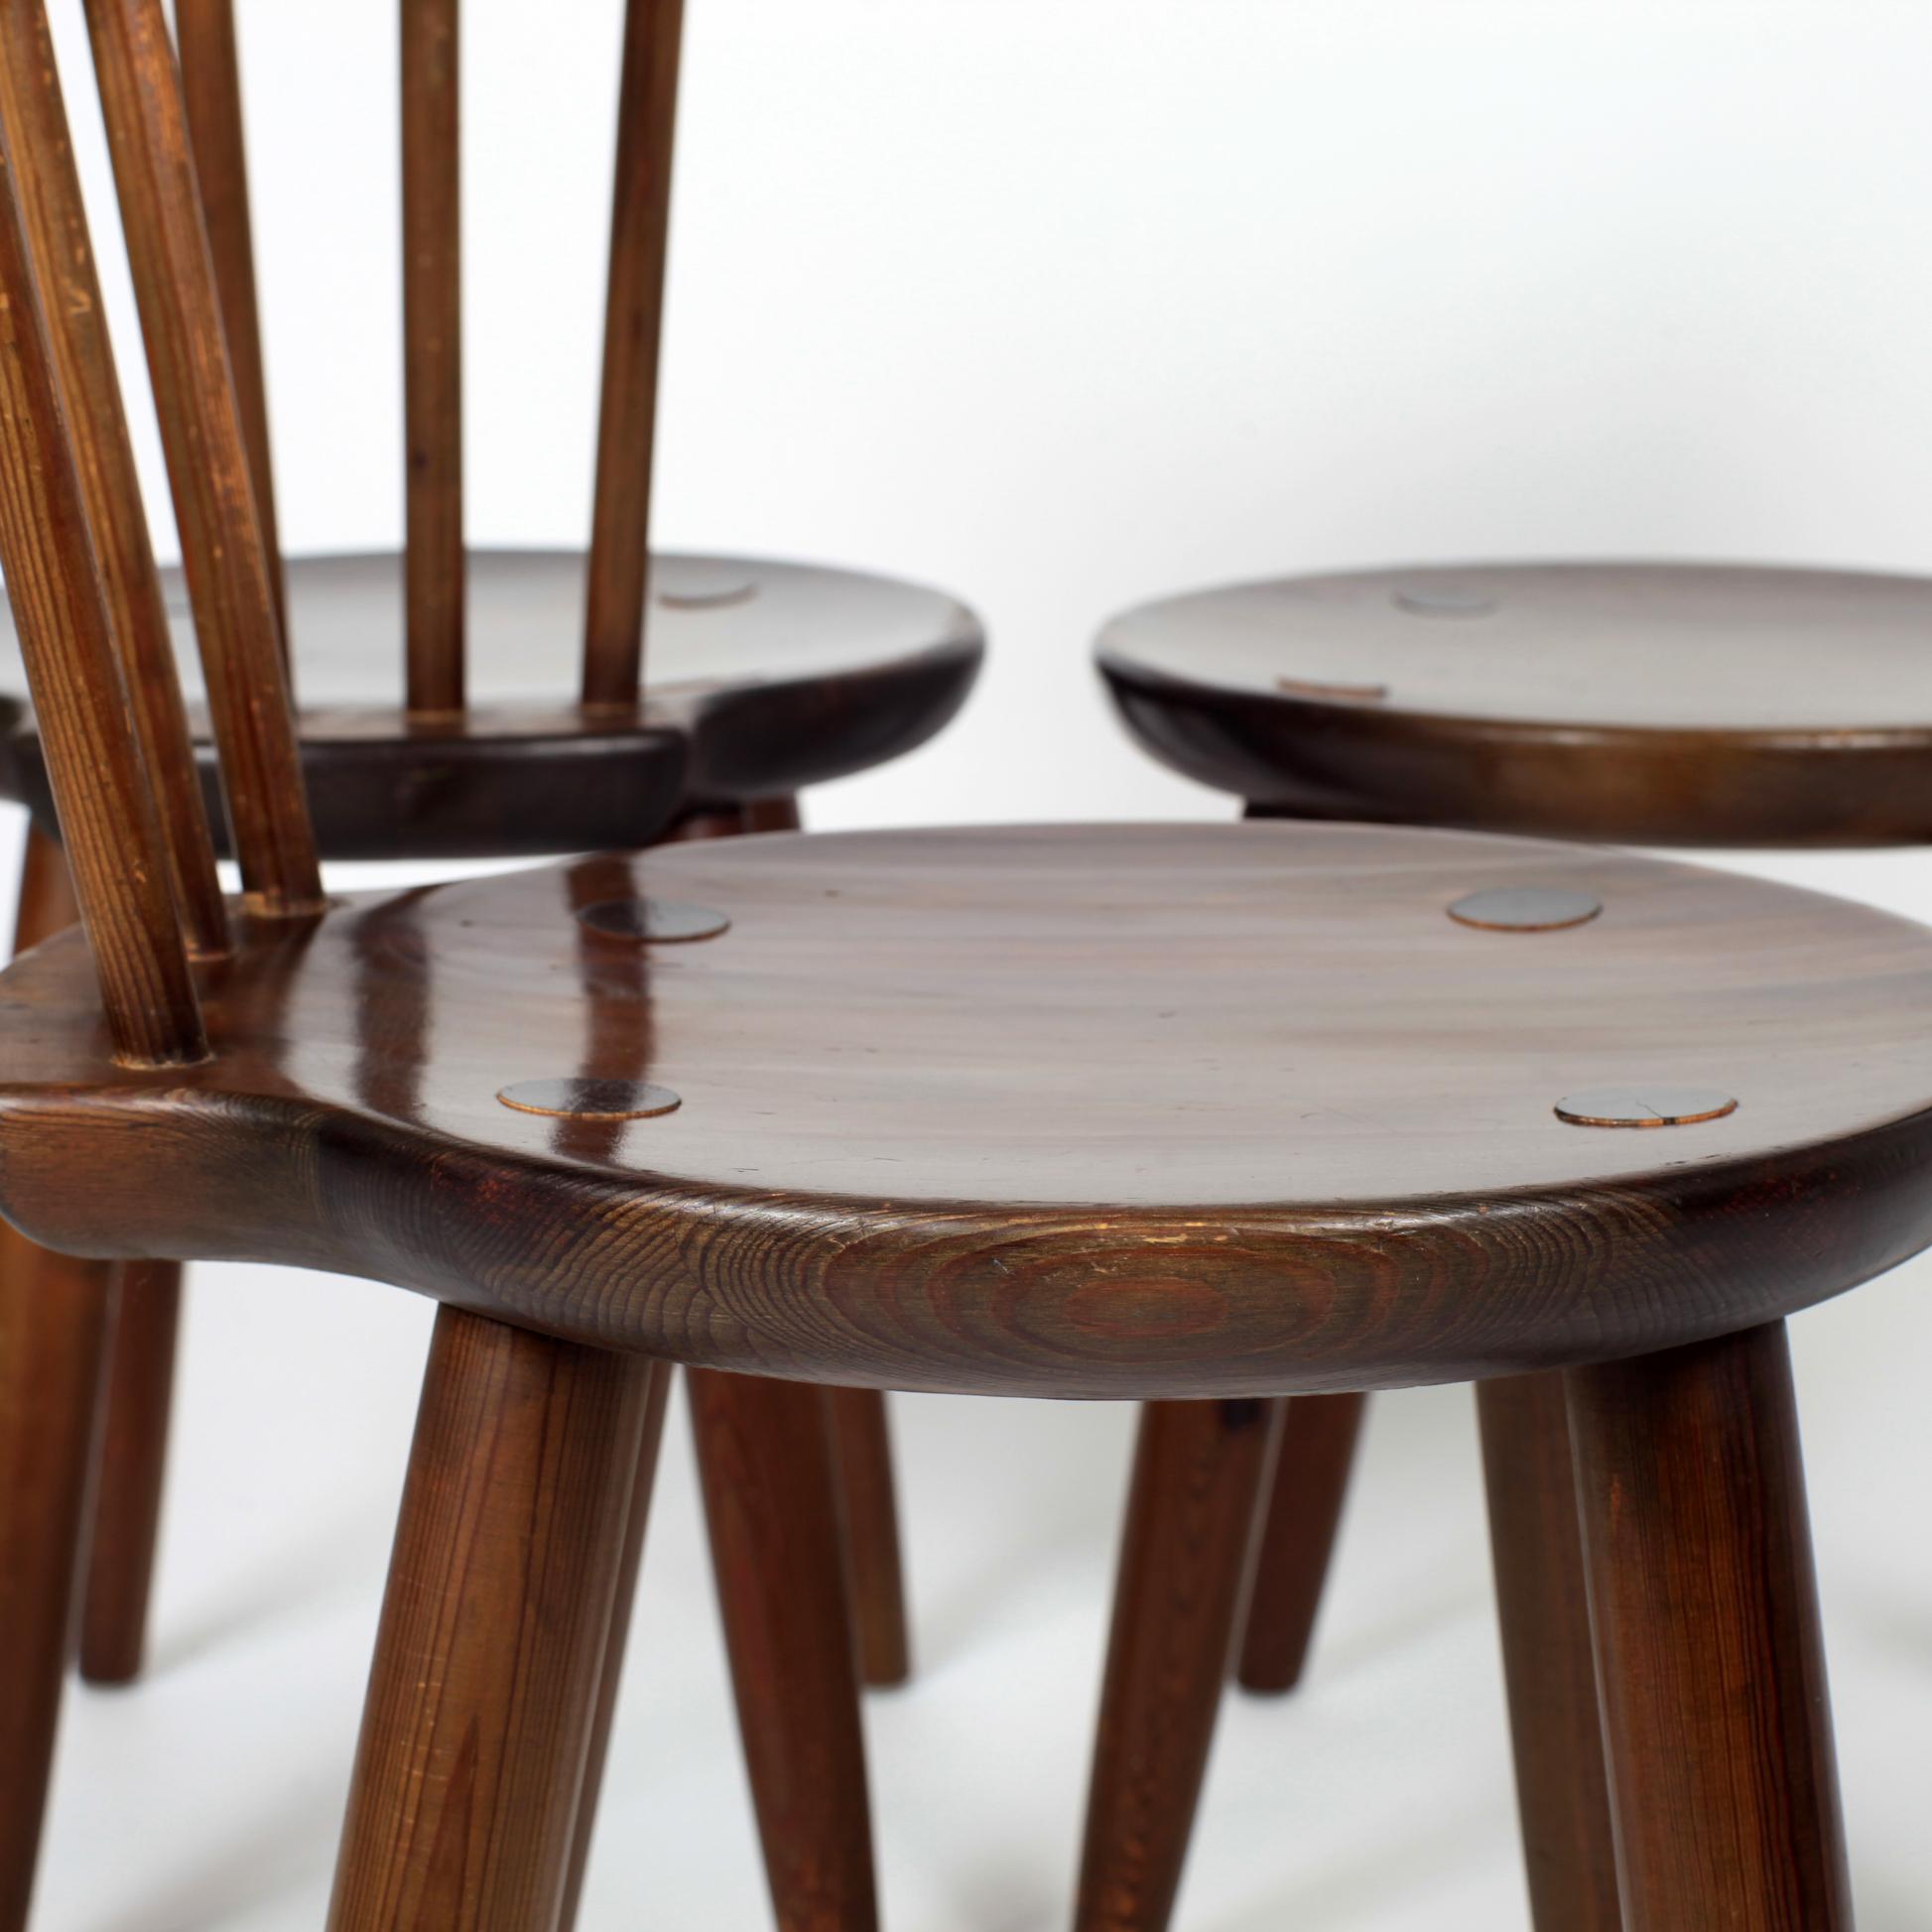 Swedish Chairs in Solid Pine Wood 1930 by Torsten Claeson For Sale 6